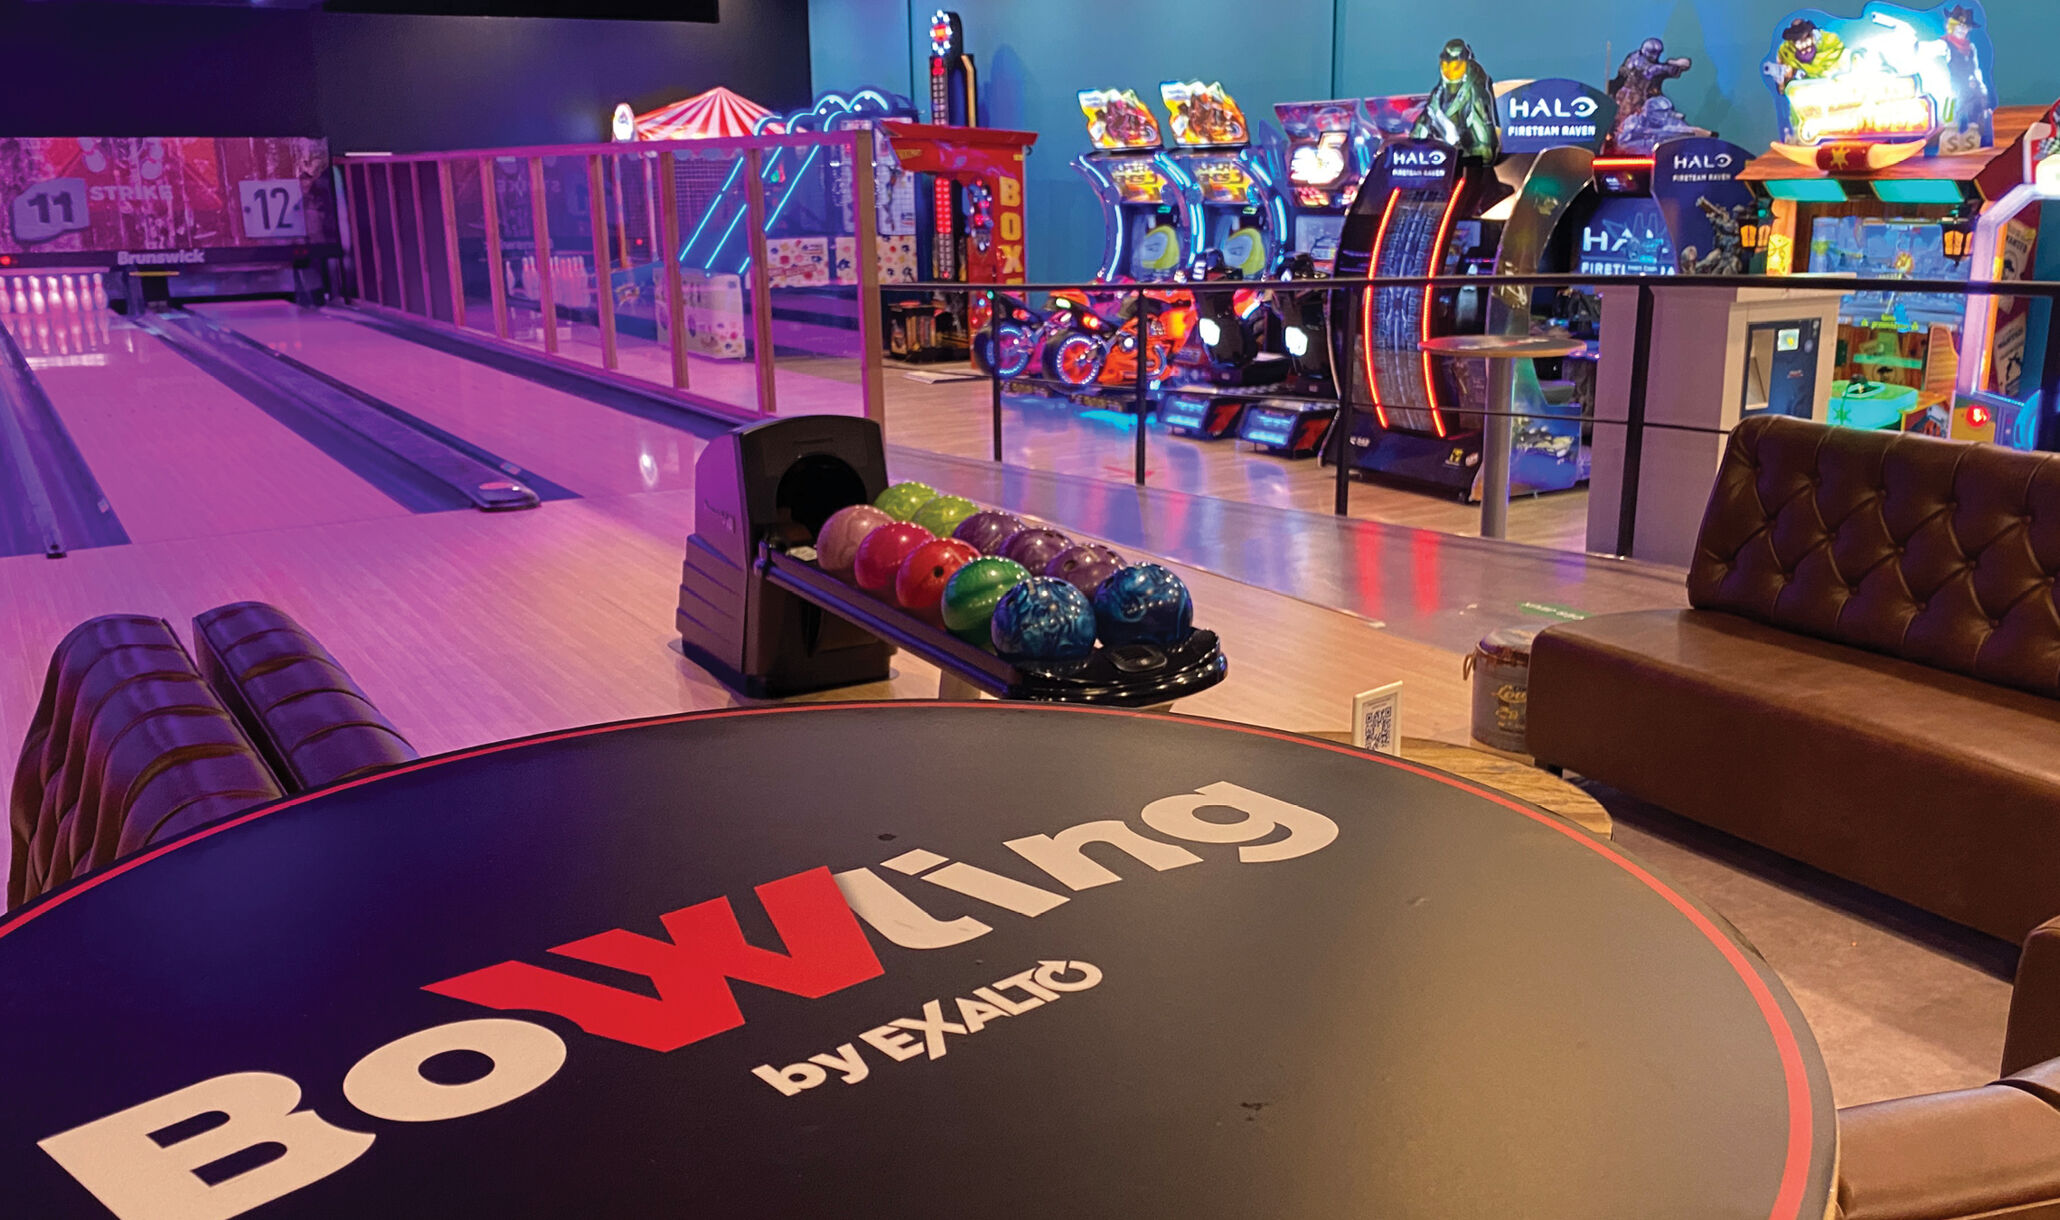 Bowling by Exalto, Dardilly, France - Games at the lanes-1